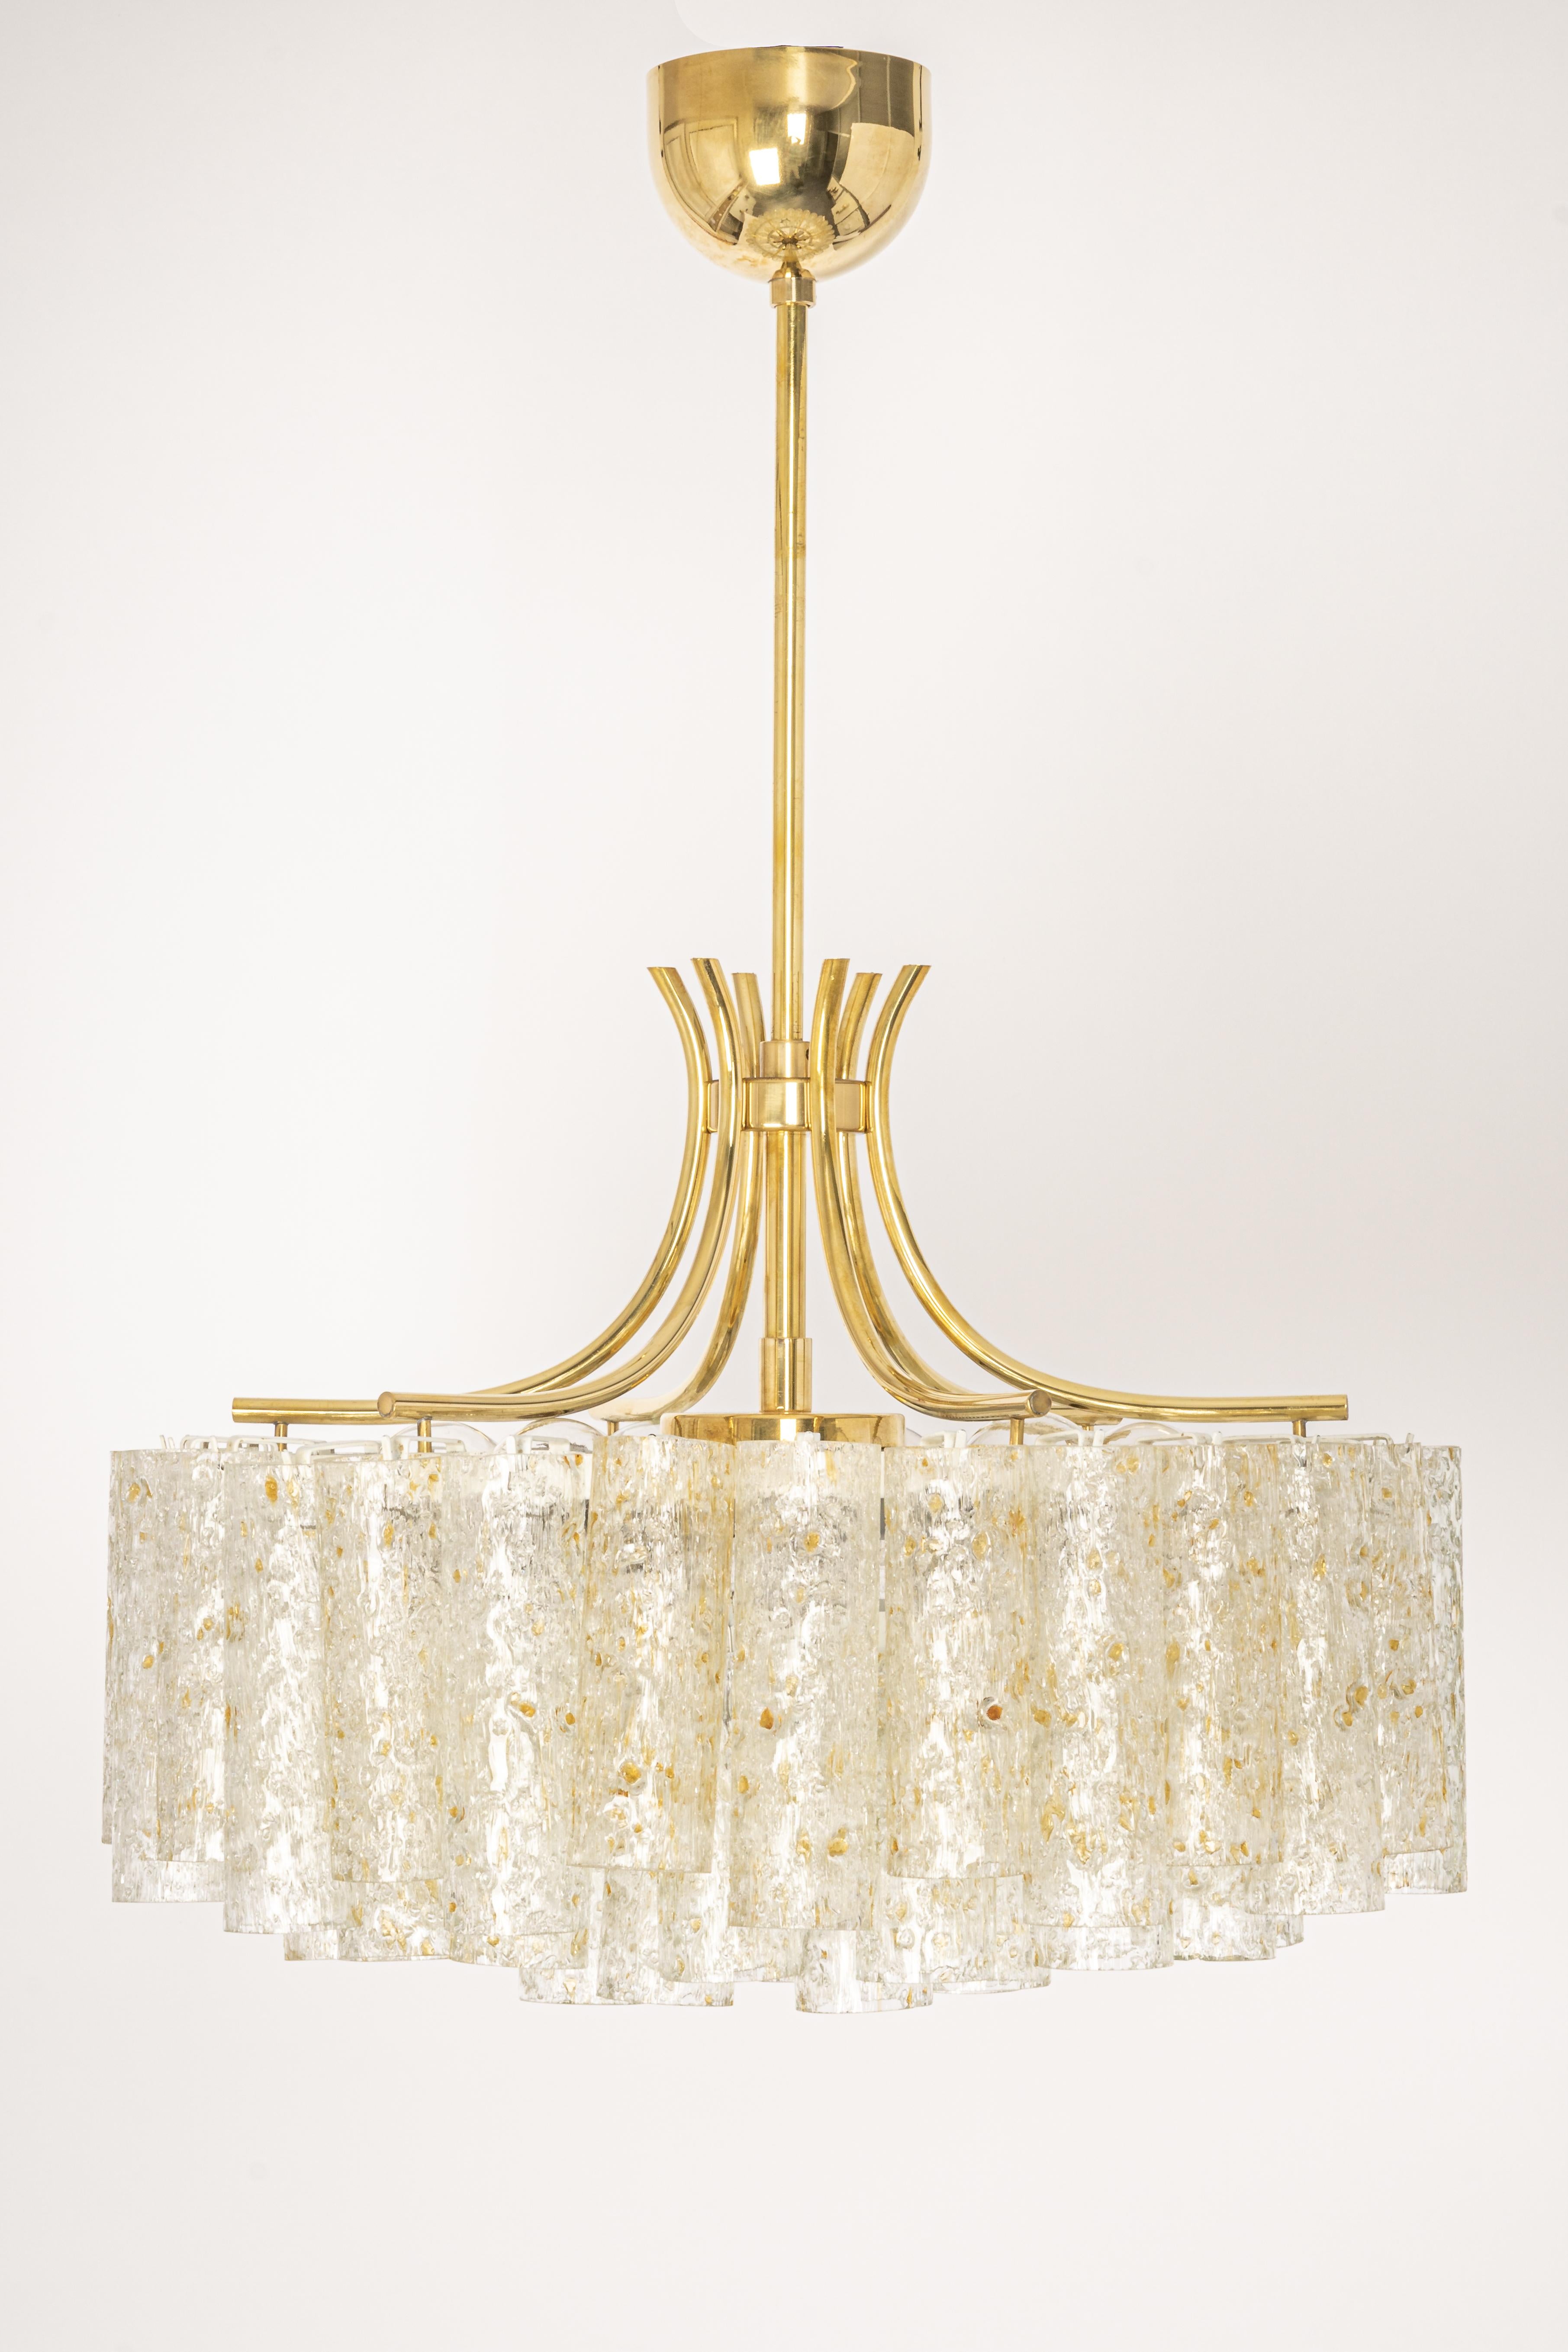 Fantastic three-tier midcentury chandelier by Doria, Germany, manufactured circa 1960-1969. Three rings of Murano glass cylinders suspended from a fixture.

Sockets: Six x E14 candelabra bulbs (up to 40 W each) + one x E27 Standard Bulb( up to 60